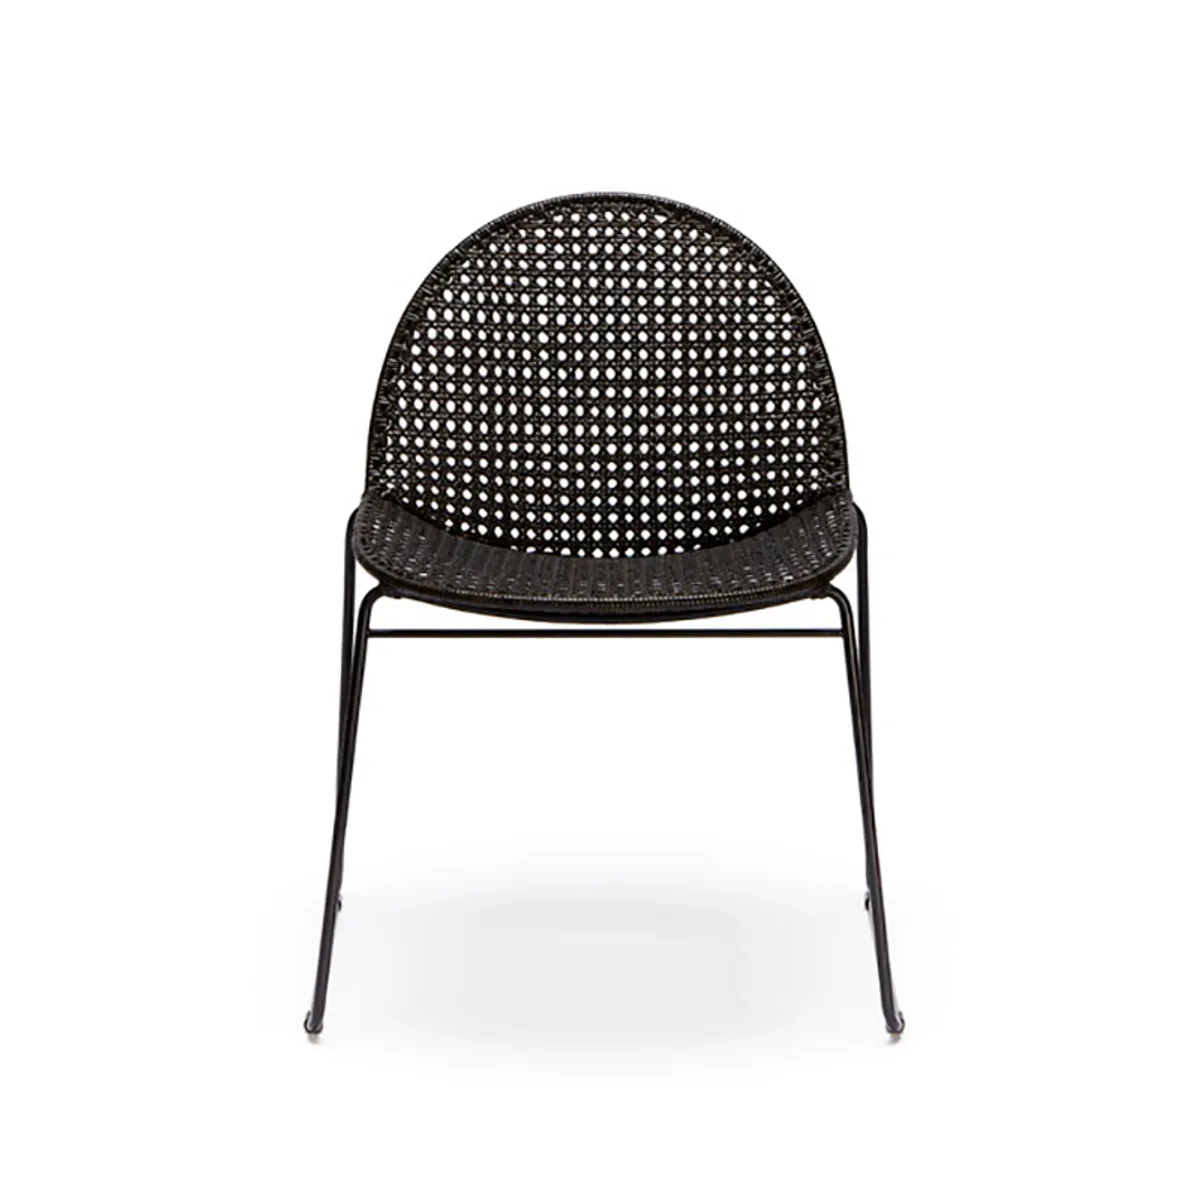 Percolator Side Chair Cane With Sled Legs For Cafes And Restaurants986